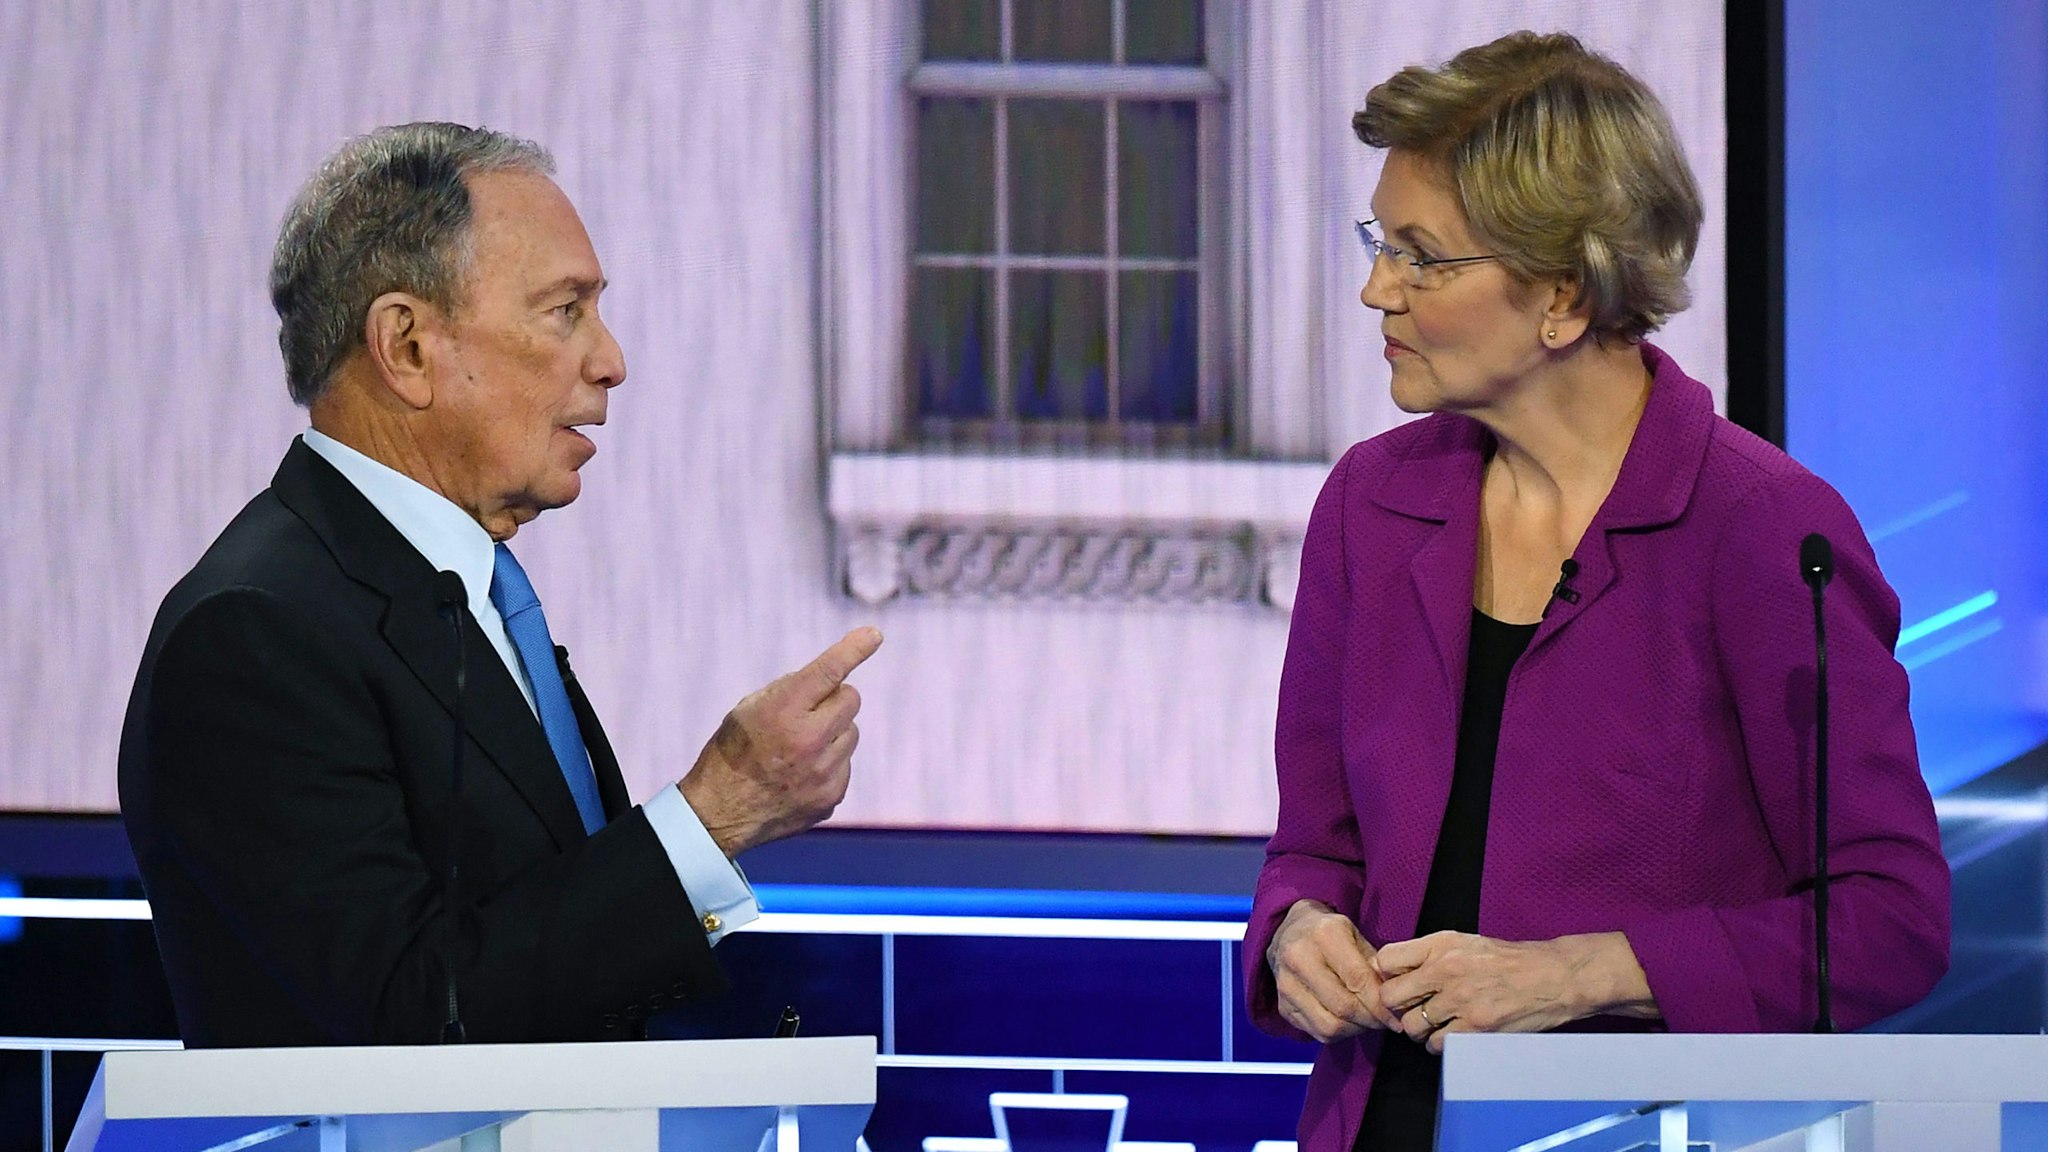 Democratic presidential hopefuls Former New York Mayor Mike Bloomberg and Massachusetts Senator Elizabeth Warren speak during a break in the ninth Democratic primary debate of the 2020 presidential campaign season co-hosted by NBC News, MSNBC, Noticias Telemundo and The Nevada Independent at the Paris Theater in Las Vegas, Nevada, on February 19, 2020.